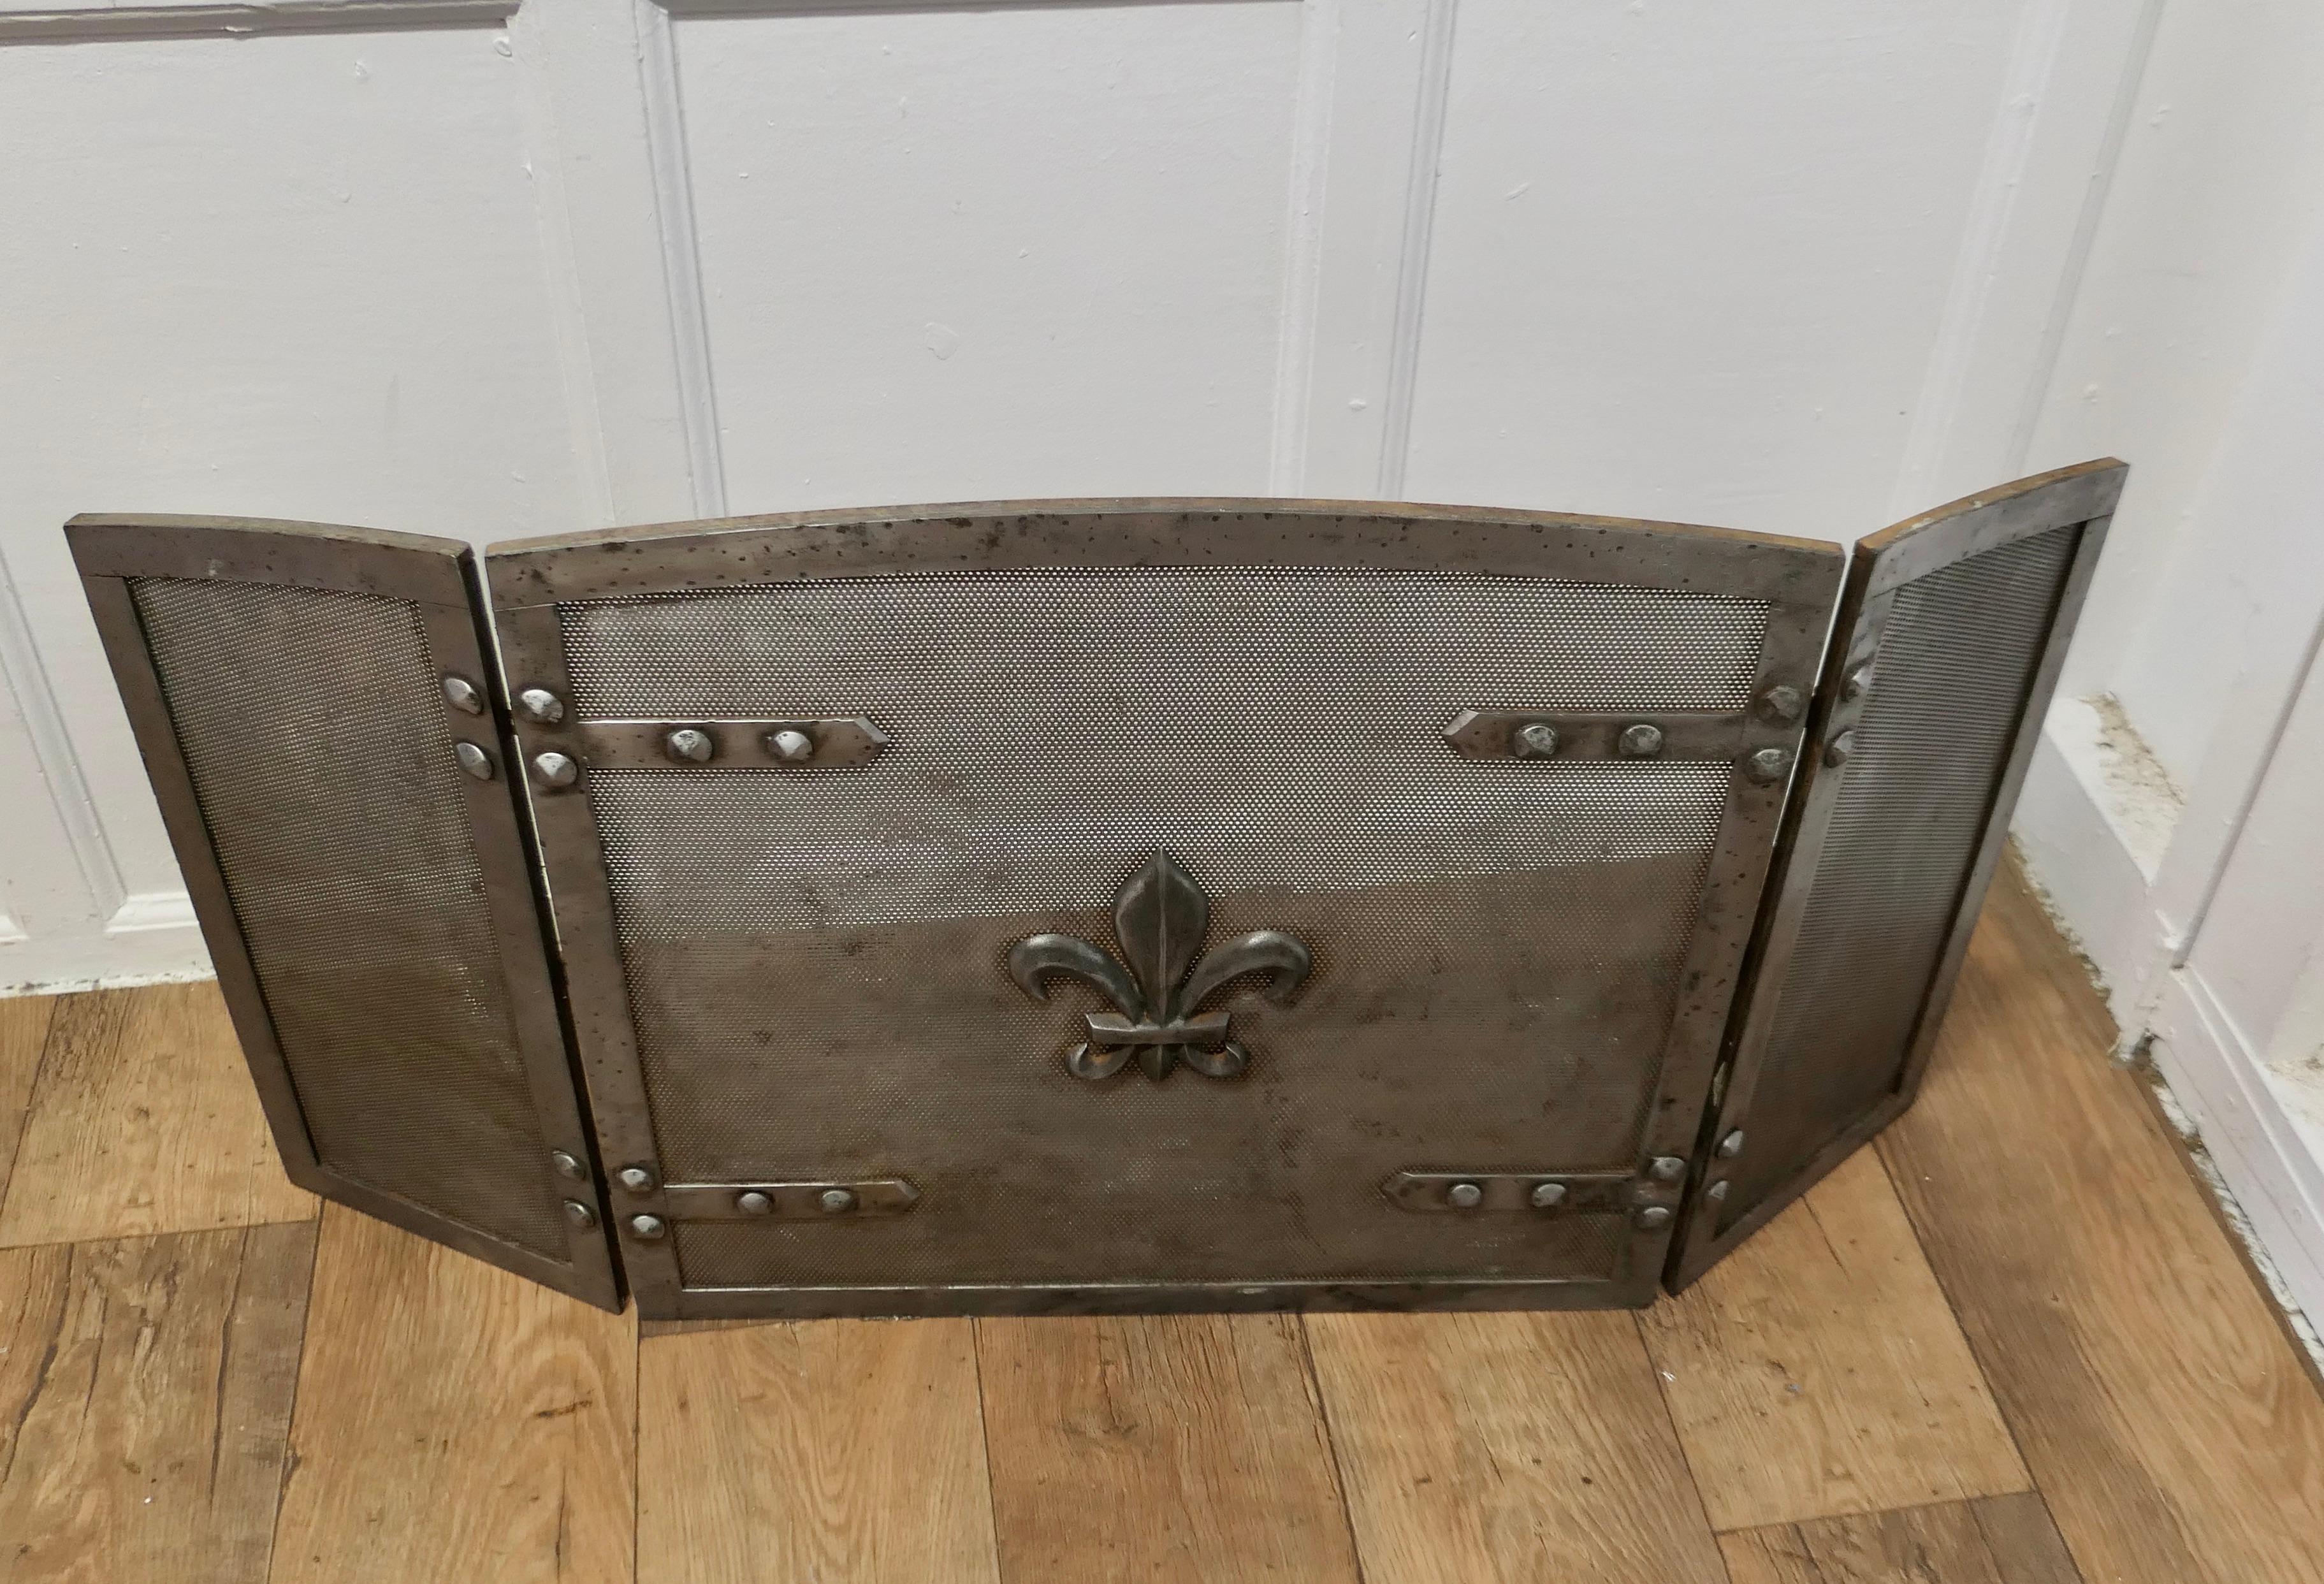 Heavy Arts and Crafts Steel Fire Guard for Inglenook Fireplace

This is a heavy folding Fireguard, it would suit a traditional Inglenook fireplace or any large fire 
The guard has a heavy inset mesh detailed with a Fleur de lys at the centre
The